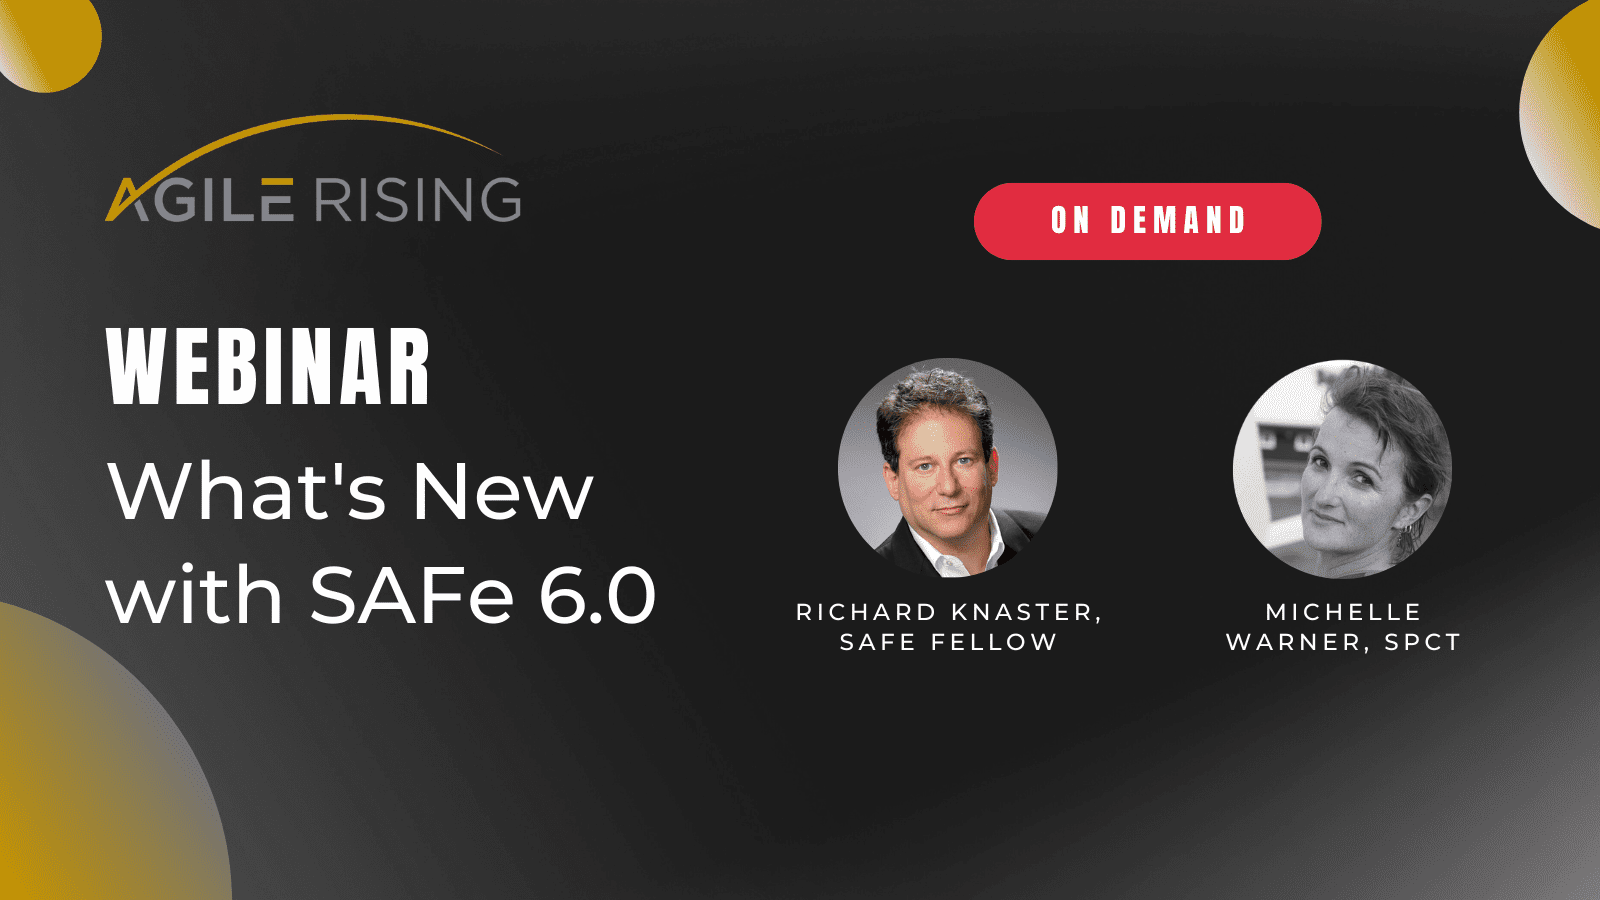 Agile Rising: What’s New with SAFe 6.0 Webinar